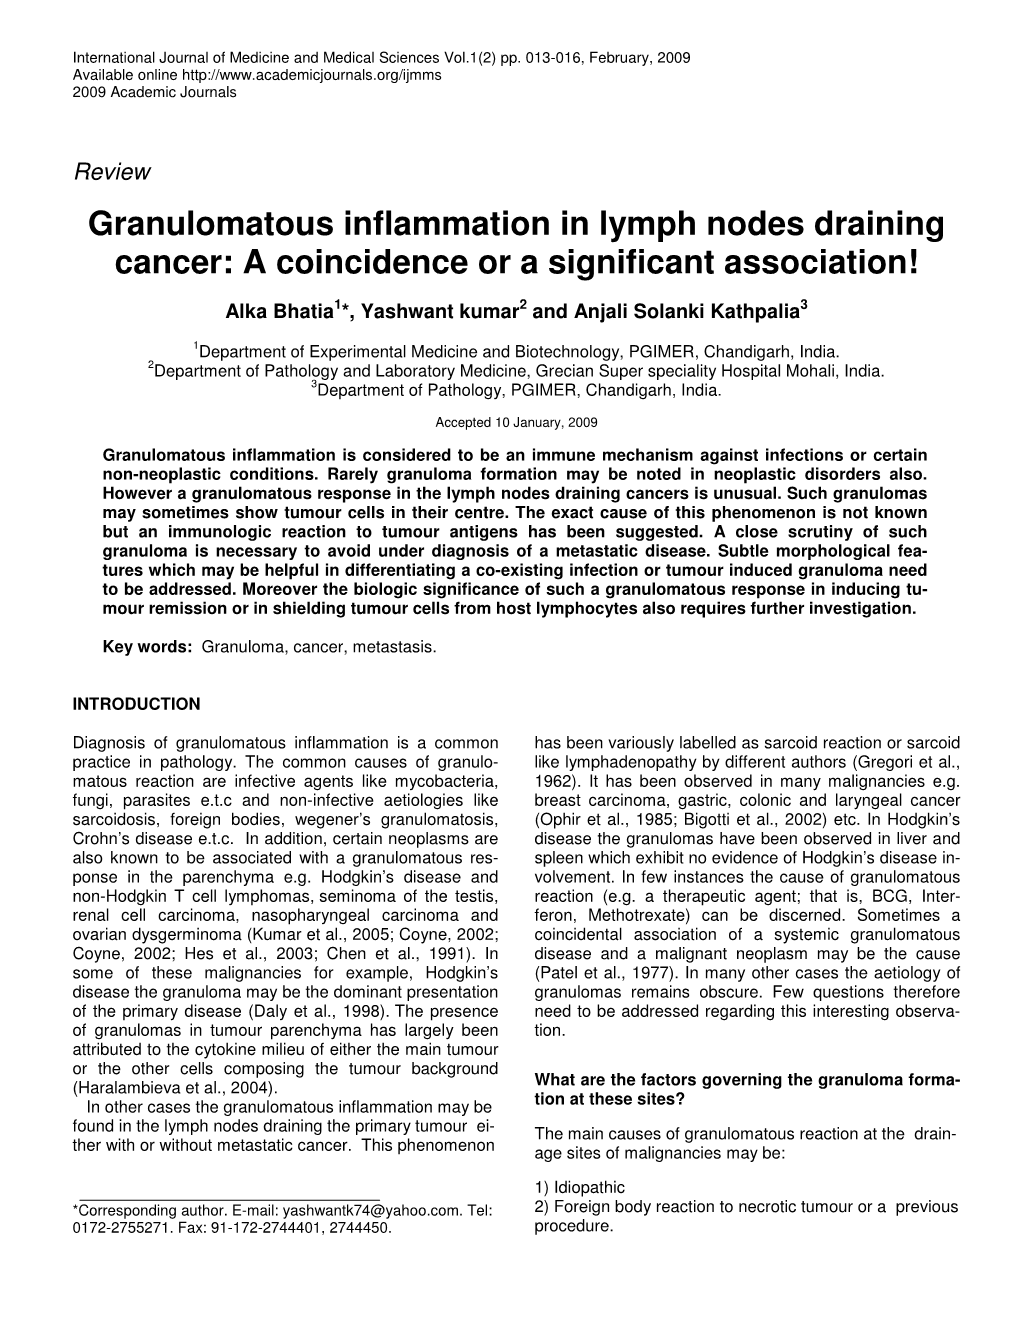 Granulomatous Inflammation in Lymph Nodes Draining Cancer: a Coincidence Or a Significant Association!